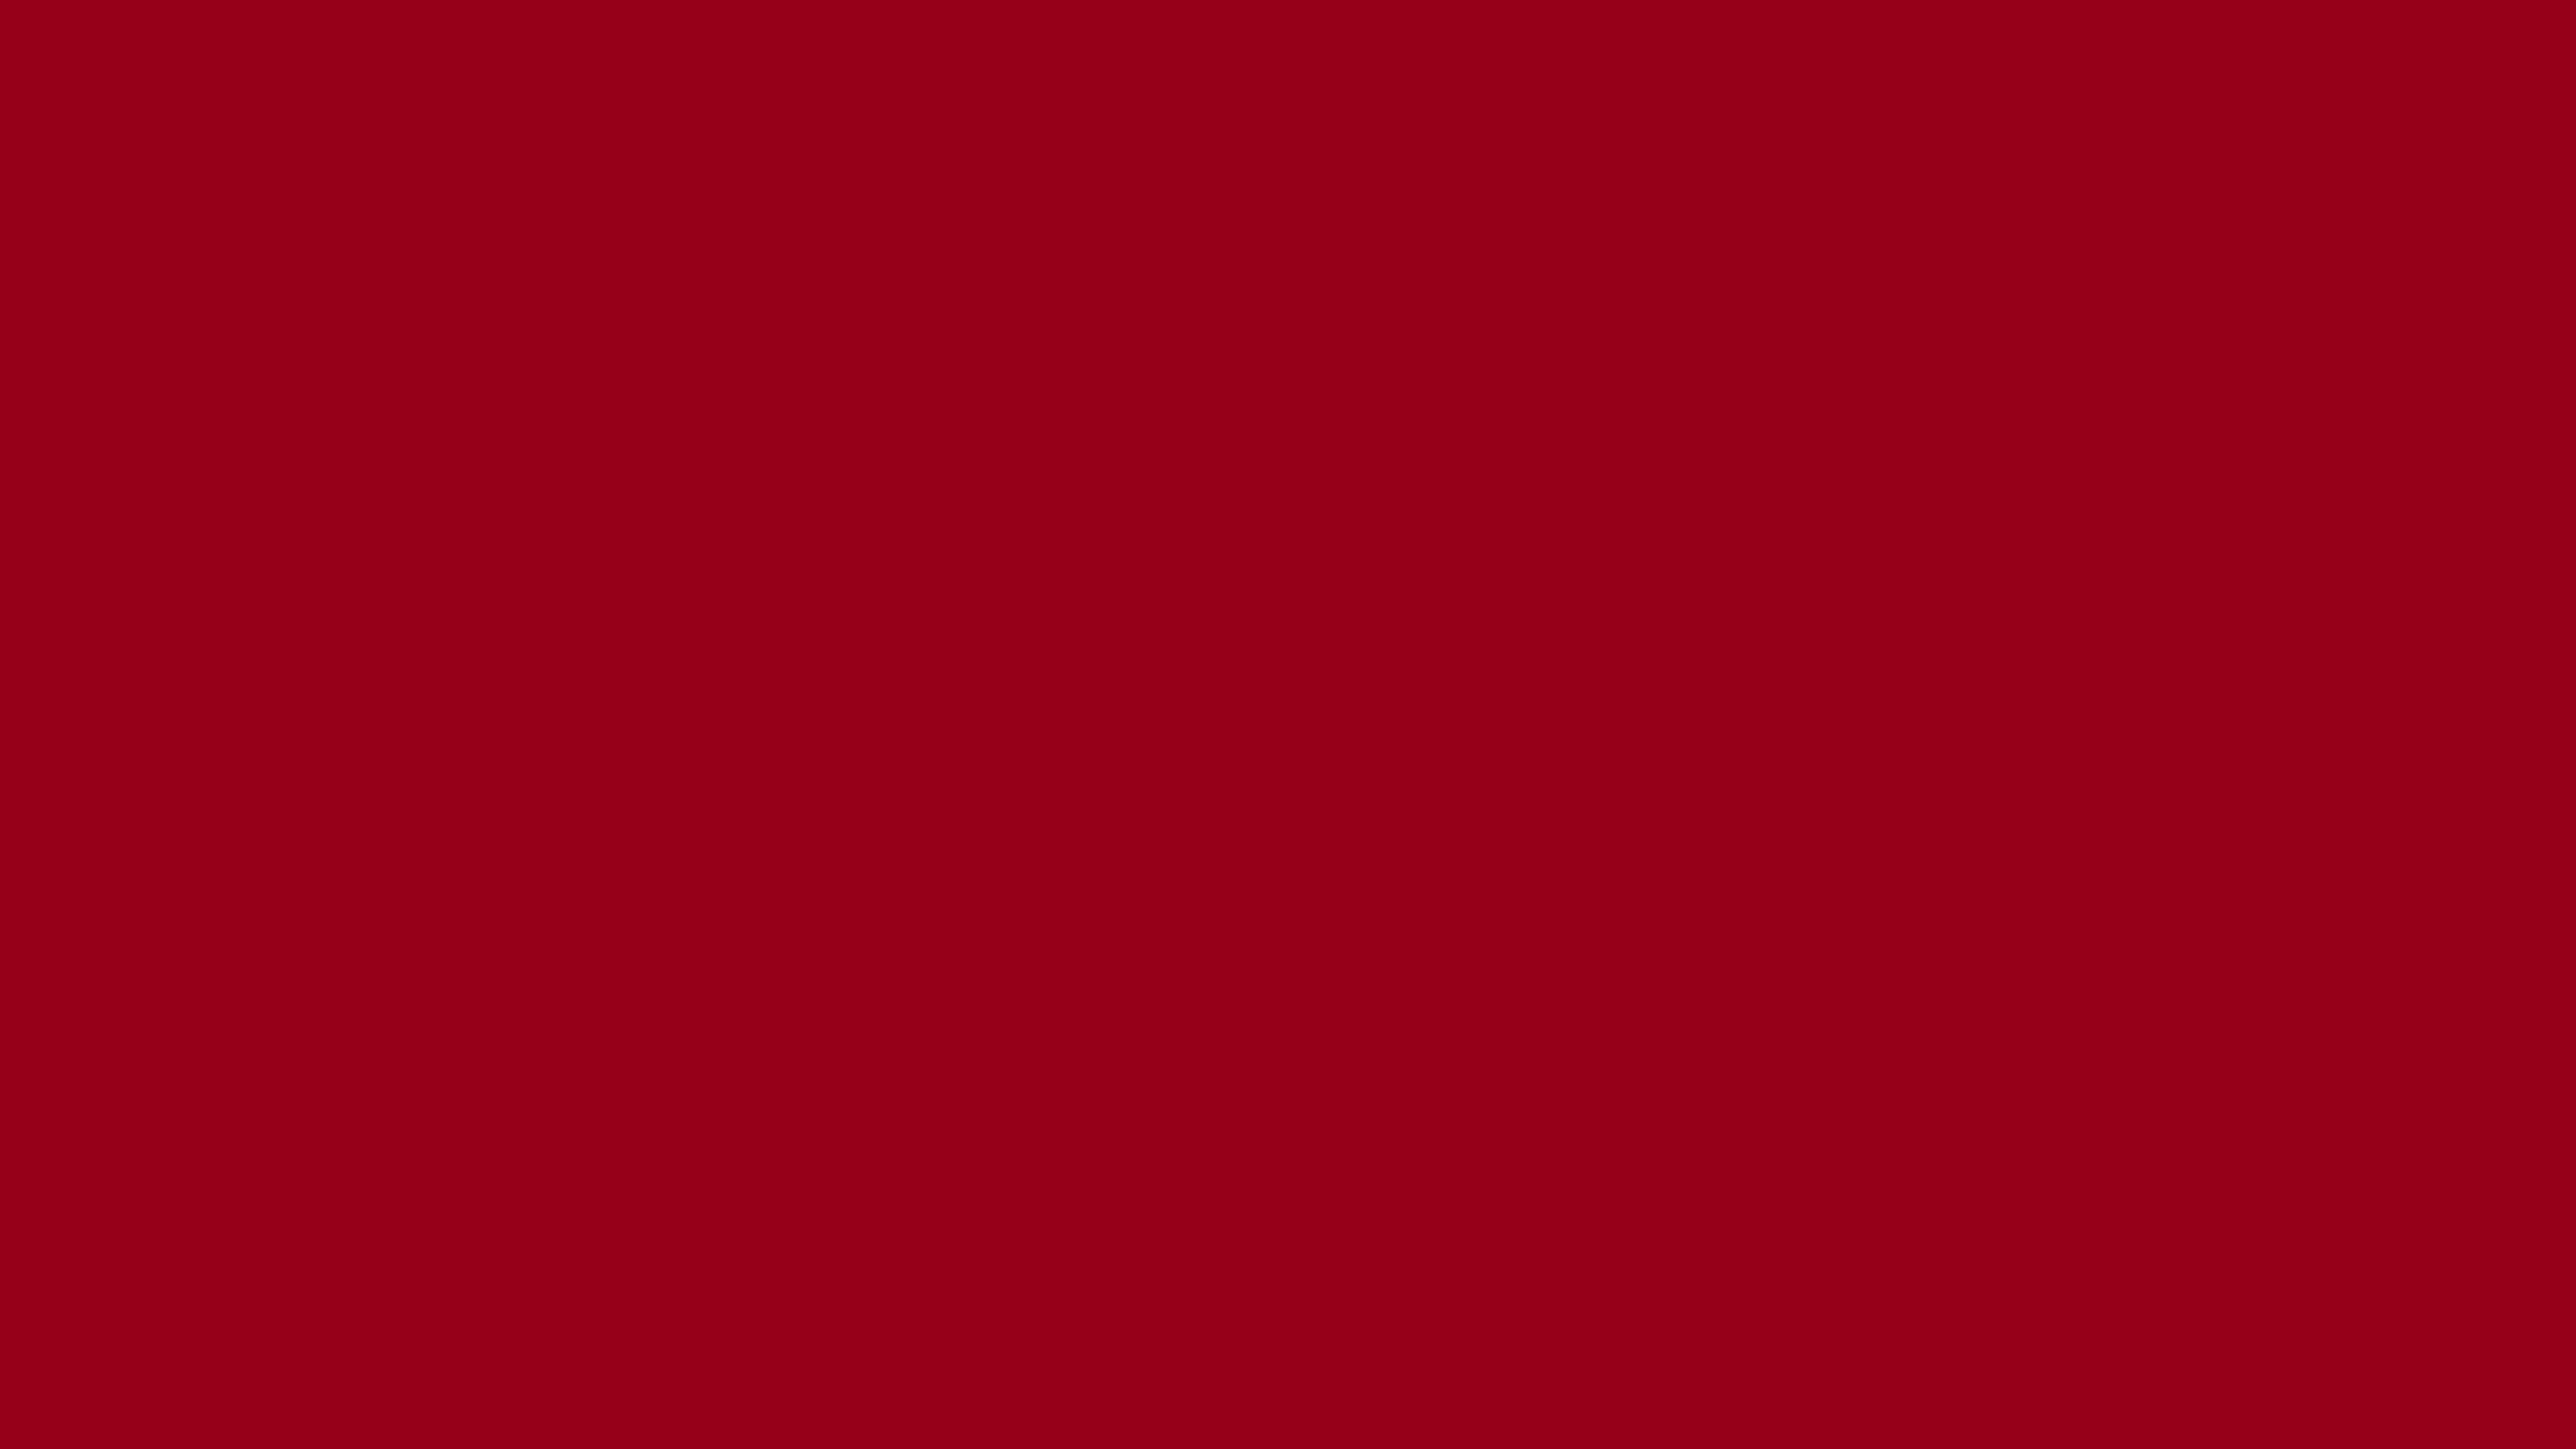 7680x4320 Carmine Solid Color Background